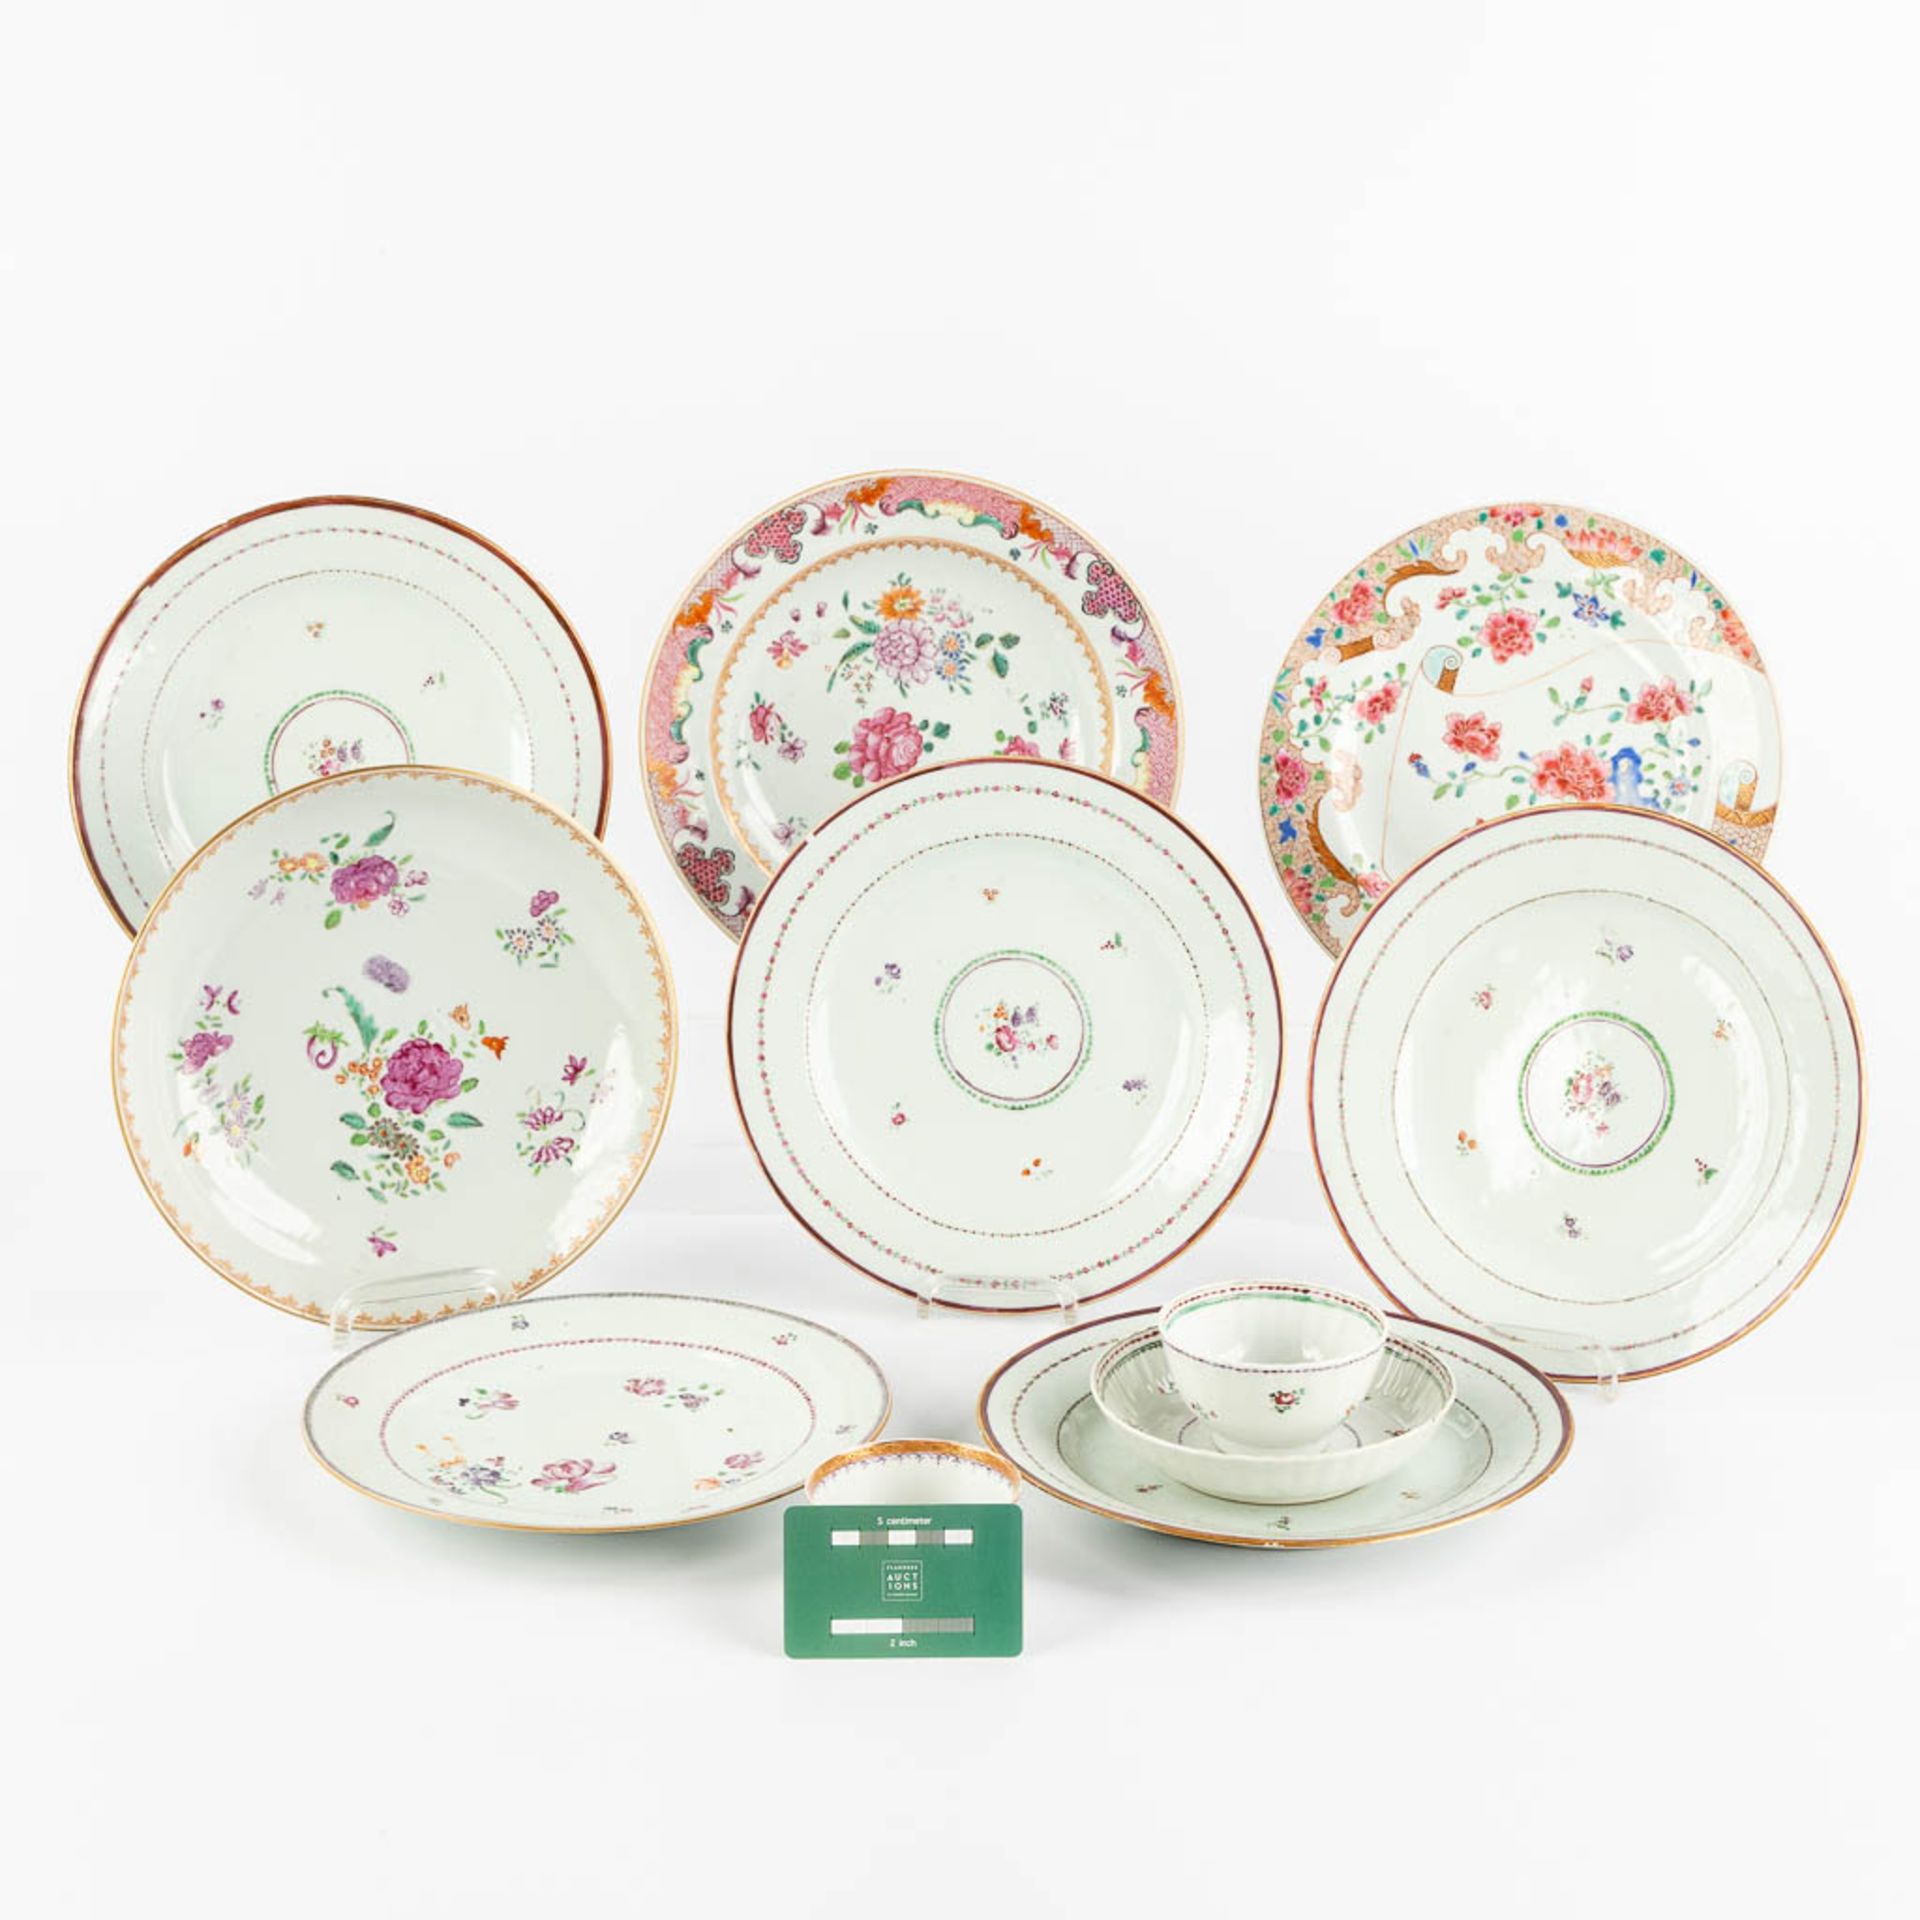 Ten Chinese Famille Rose plates and cups, flower decor. (D:23,5 cm) - Image 2 of 13